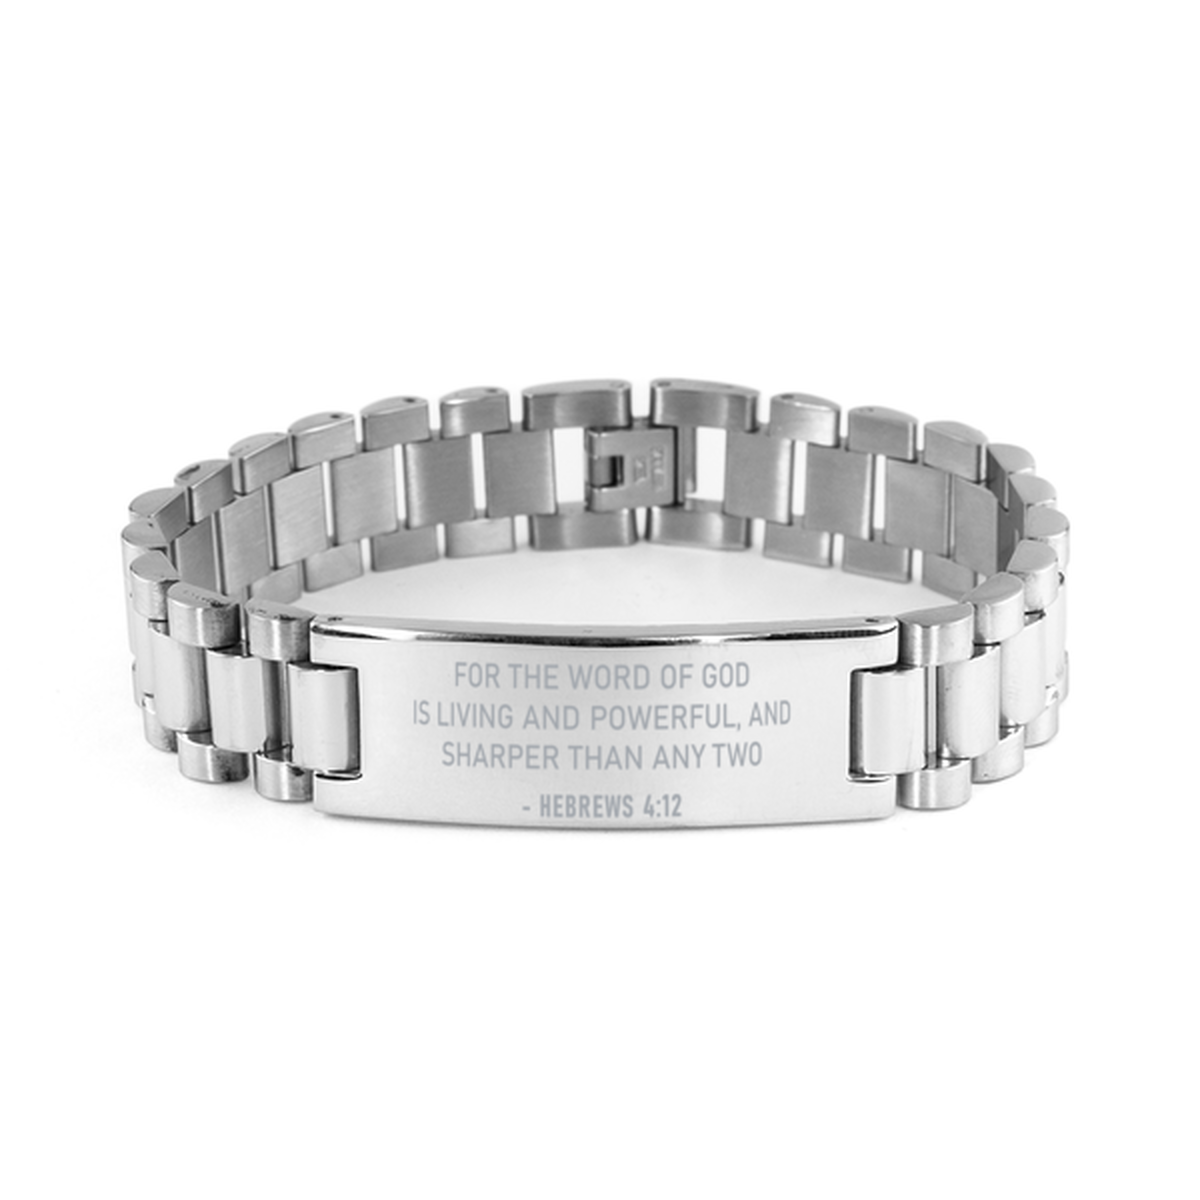 Christian Ladder Stainless Steel Bracelet, Hebrews 4:12 For The Word Of God Is Living And Powerful, And, Motivational Bible Verse Gifts For Men Women